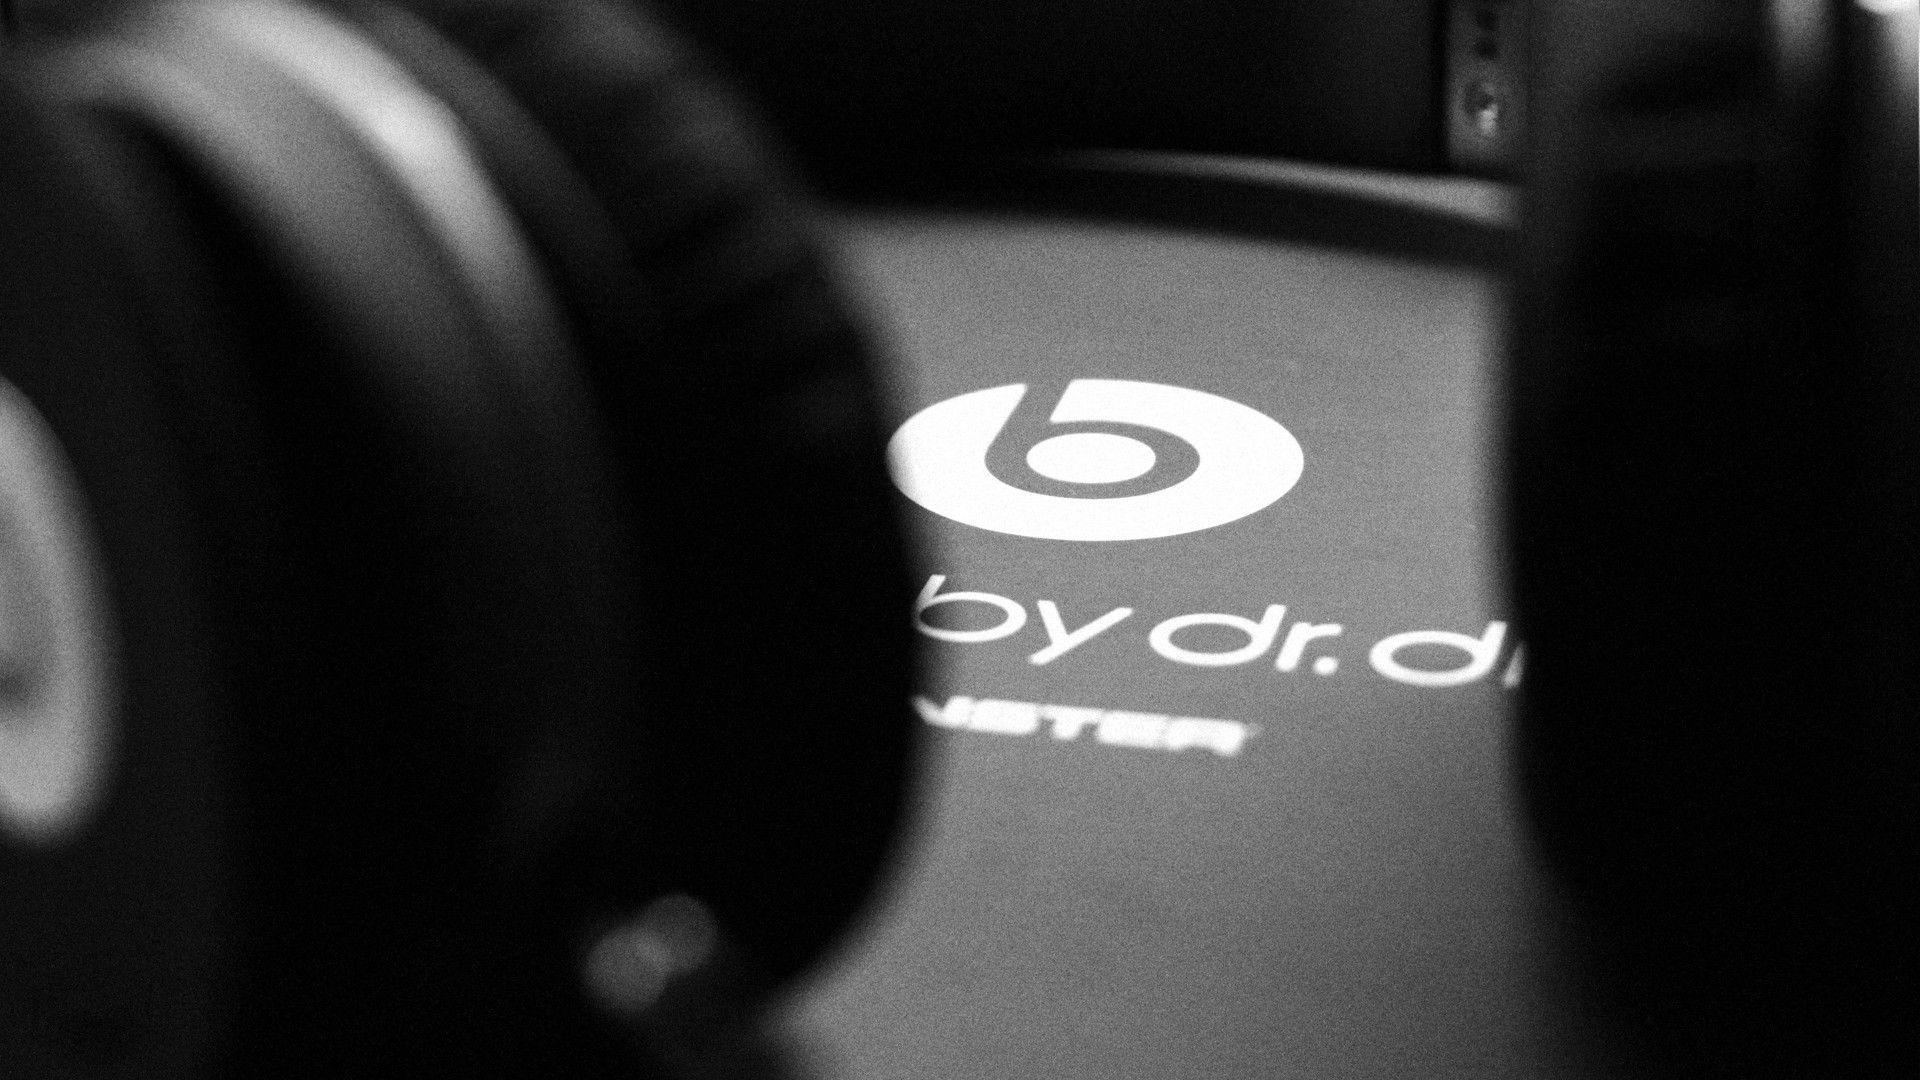 Beats By Dr Dre wallpapers 176860